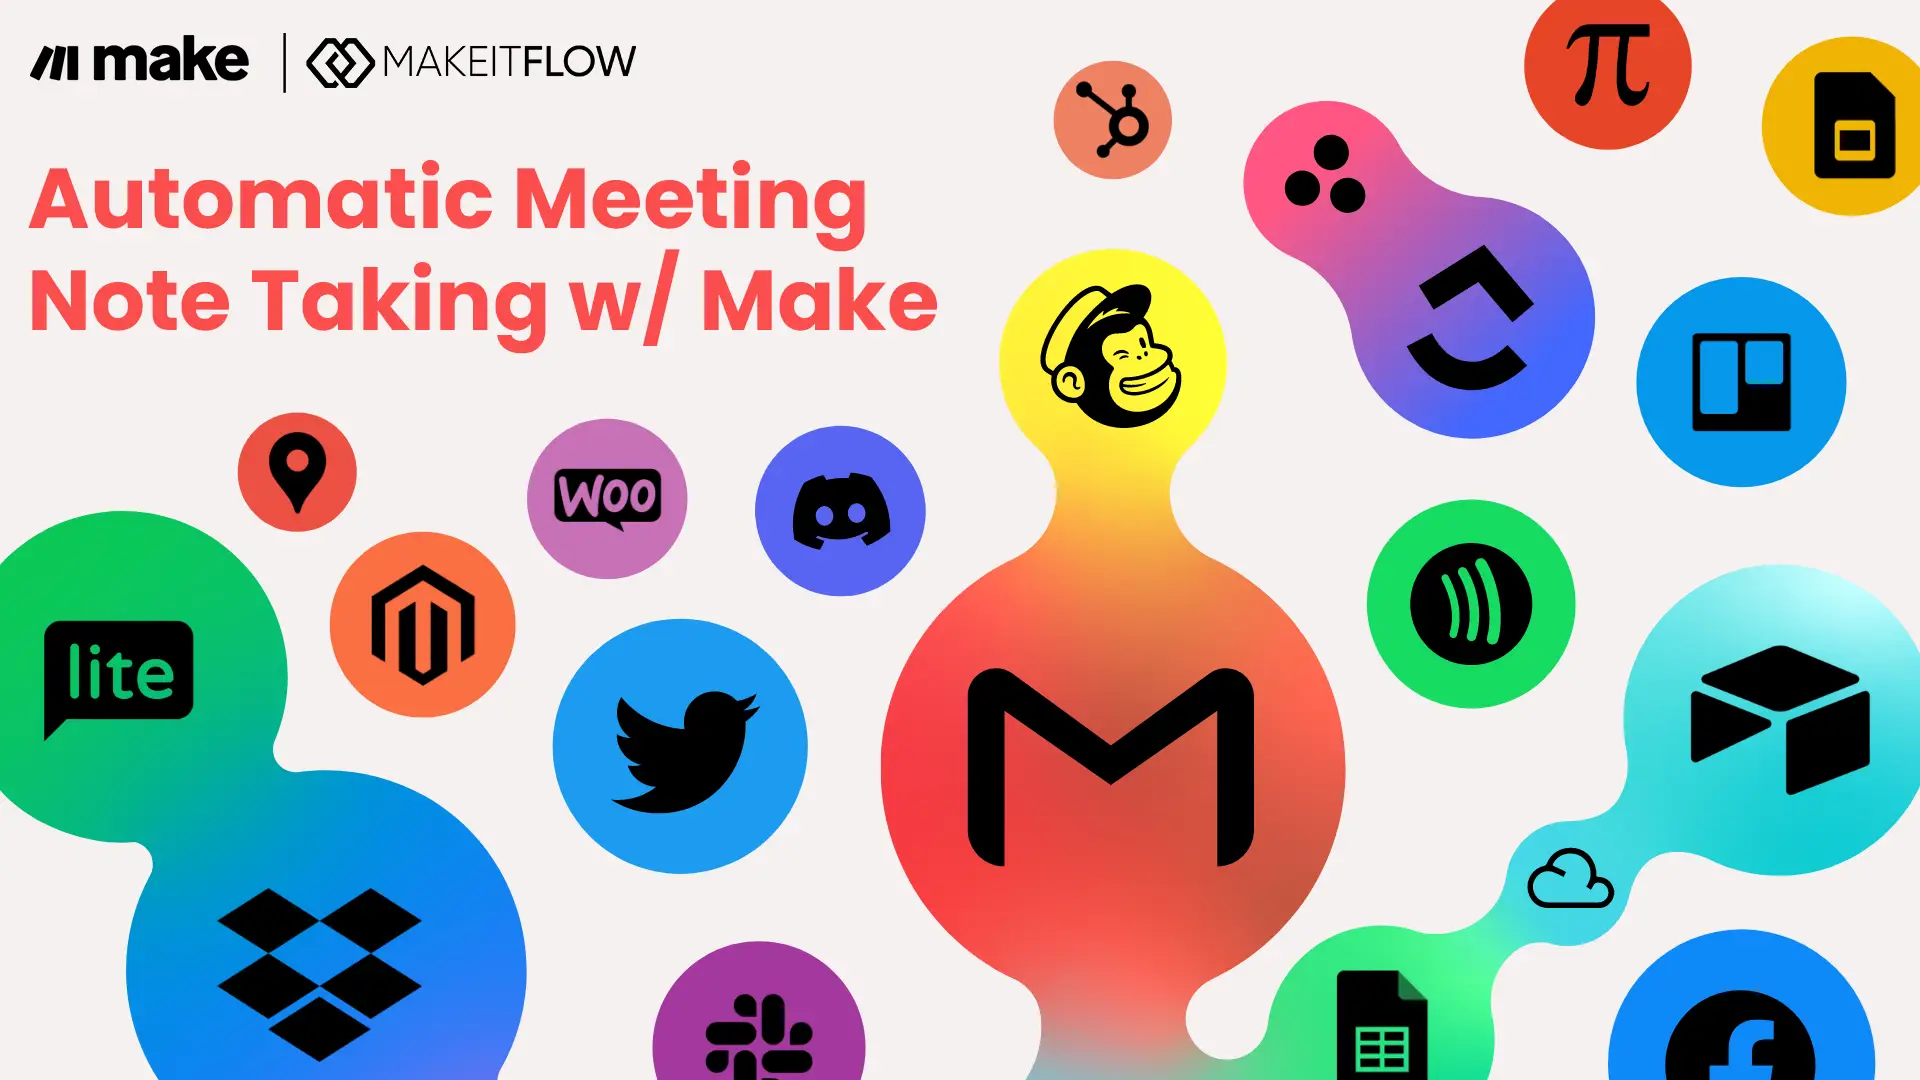 Streamline Meetings with Google Meet, Make, and ChatGPT